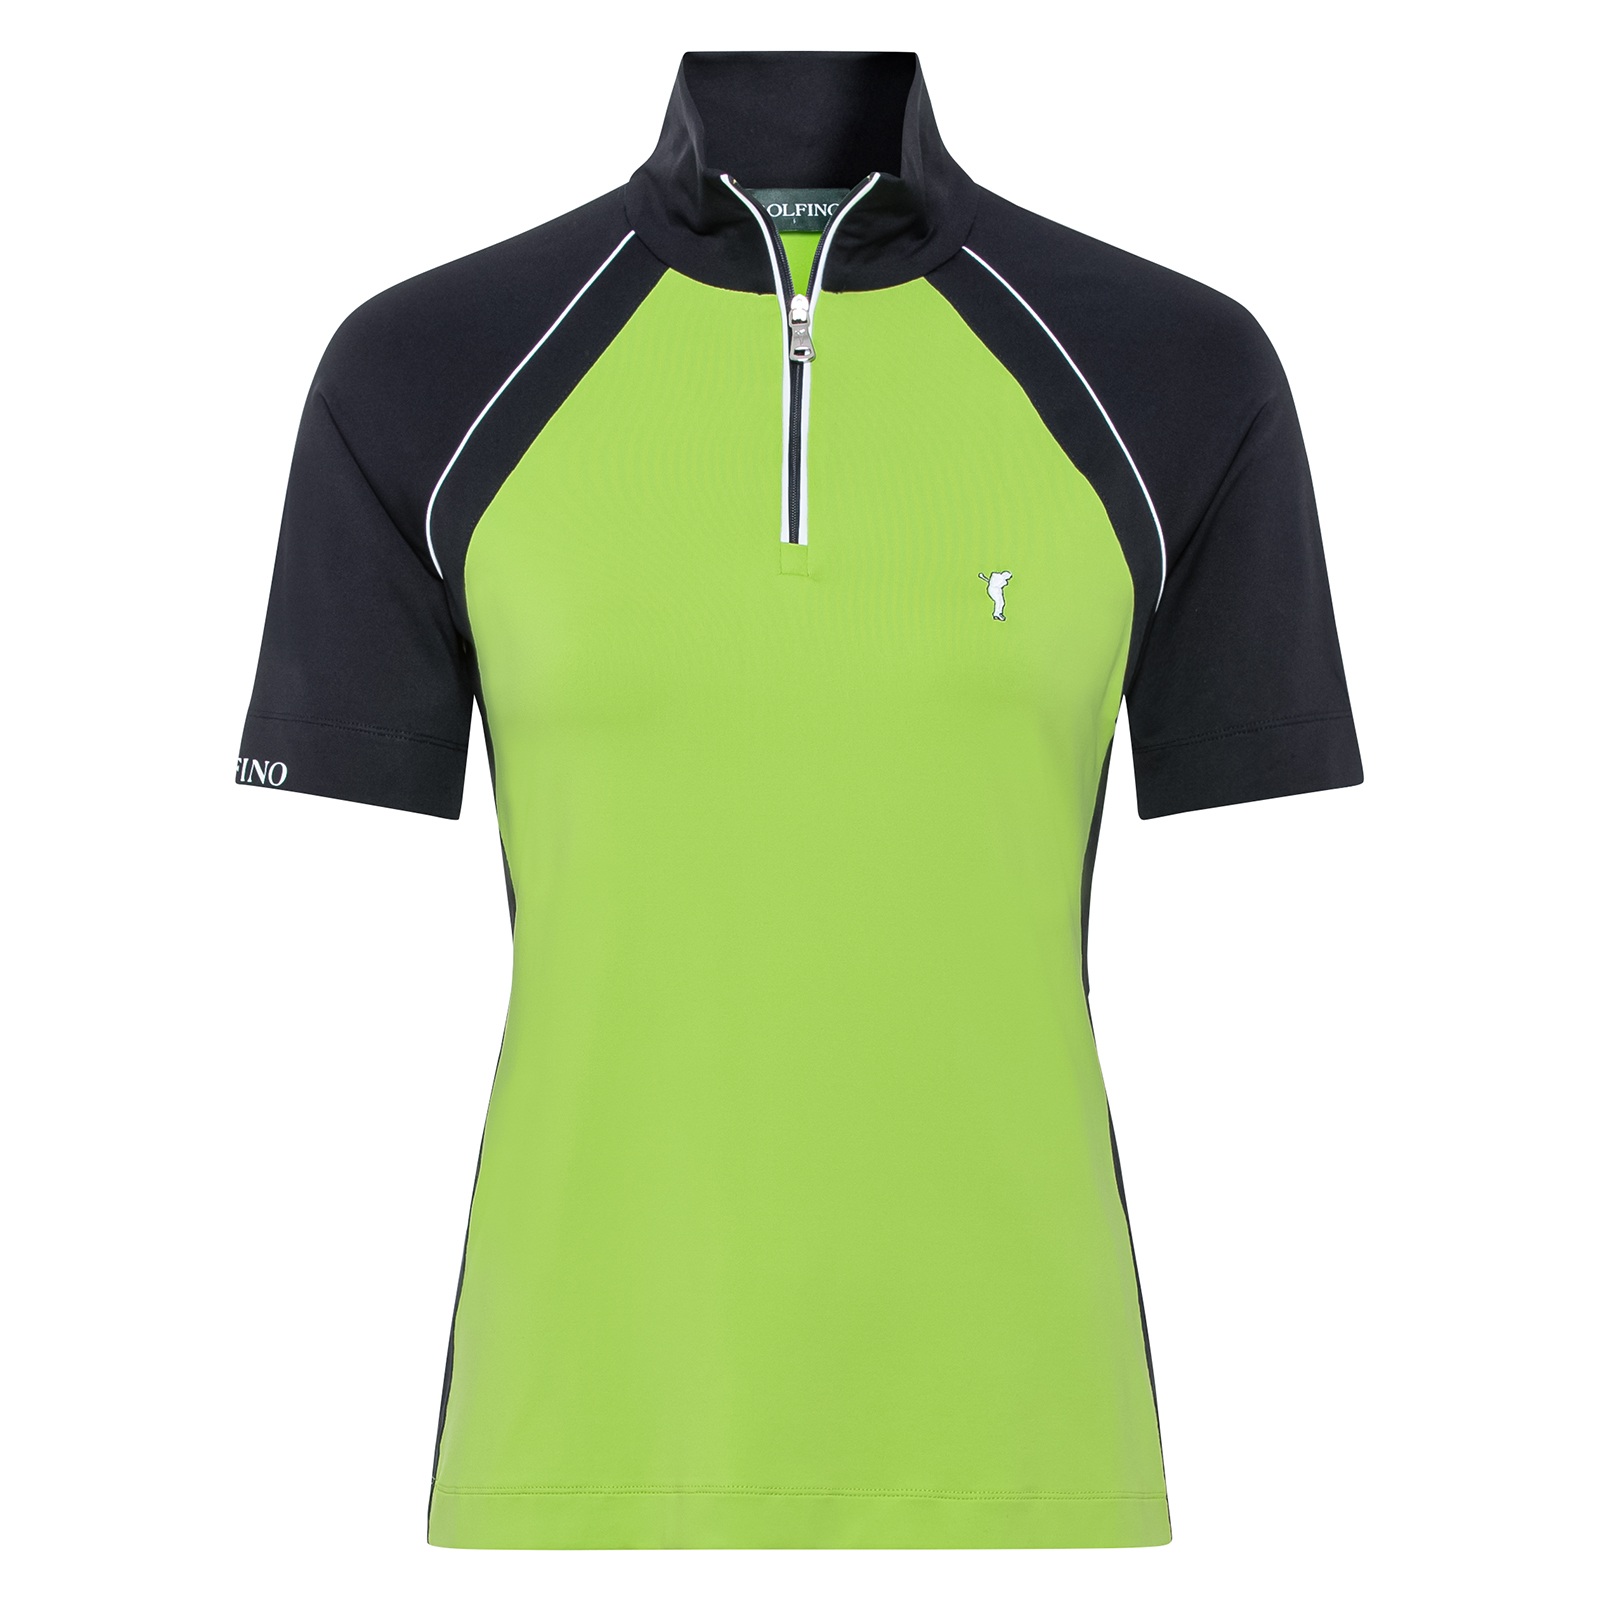 Ladies' pro-style golf polo shirt with moisture management function 